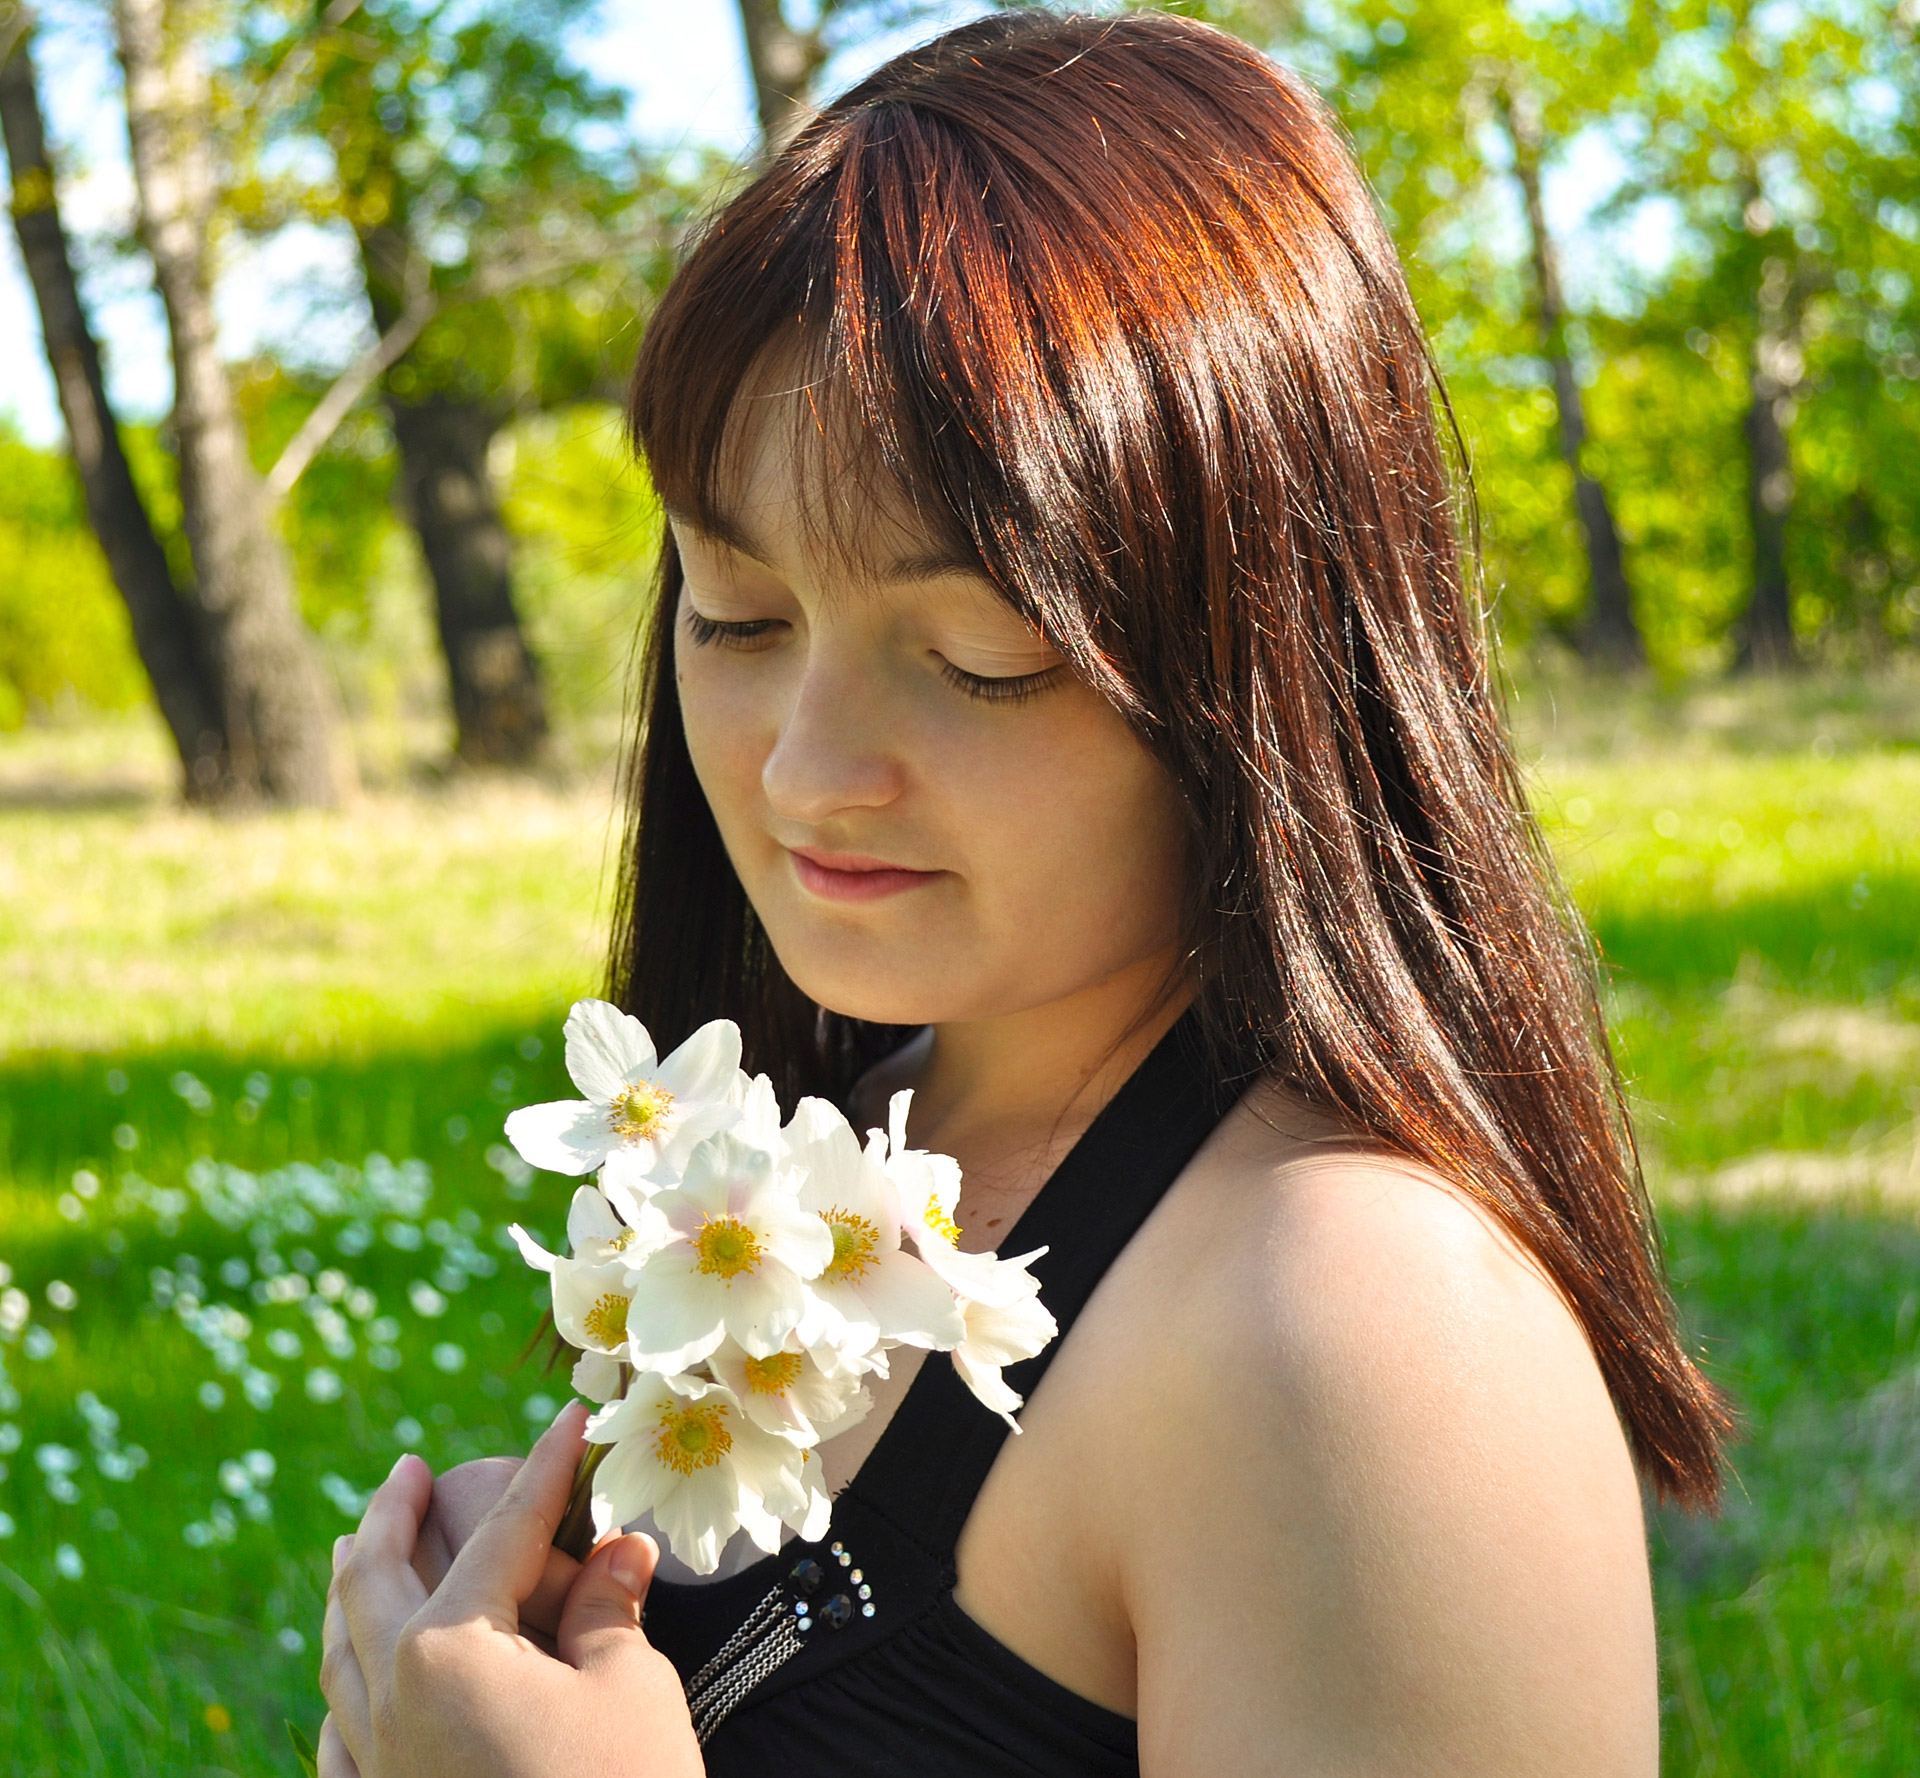 Girl with flowers photo